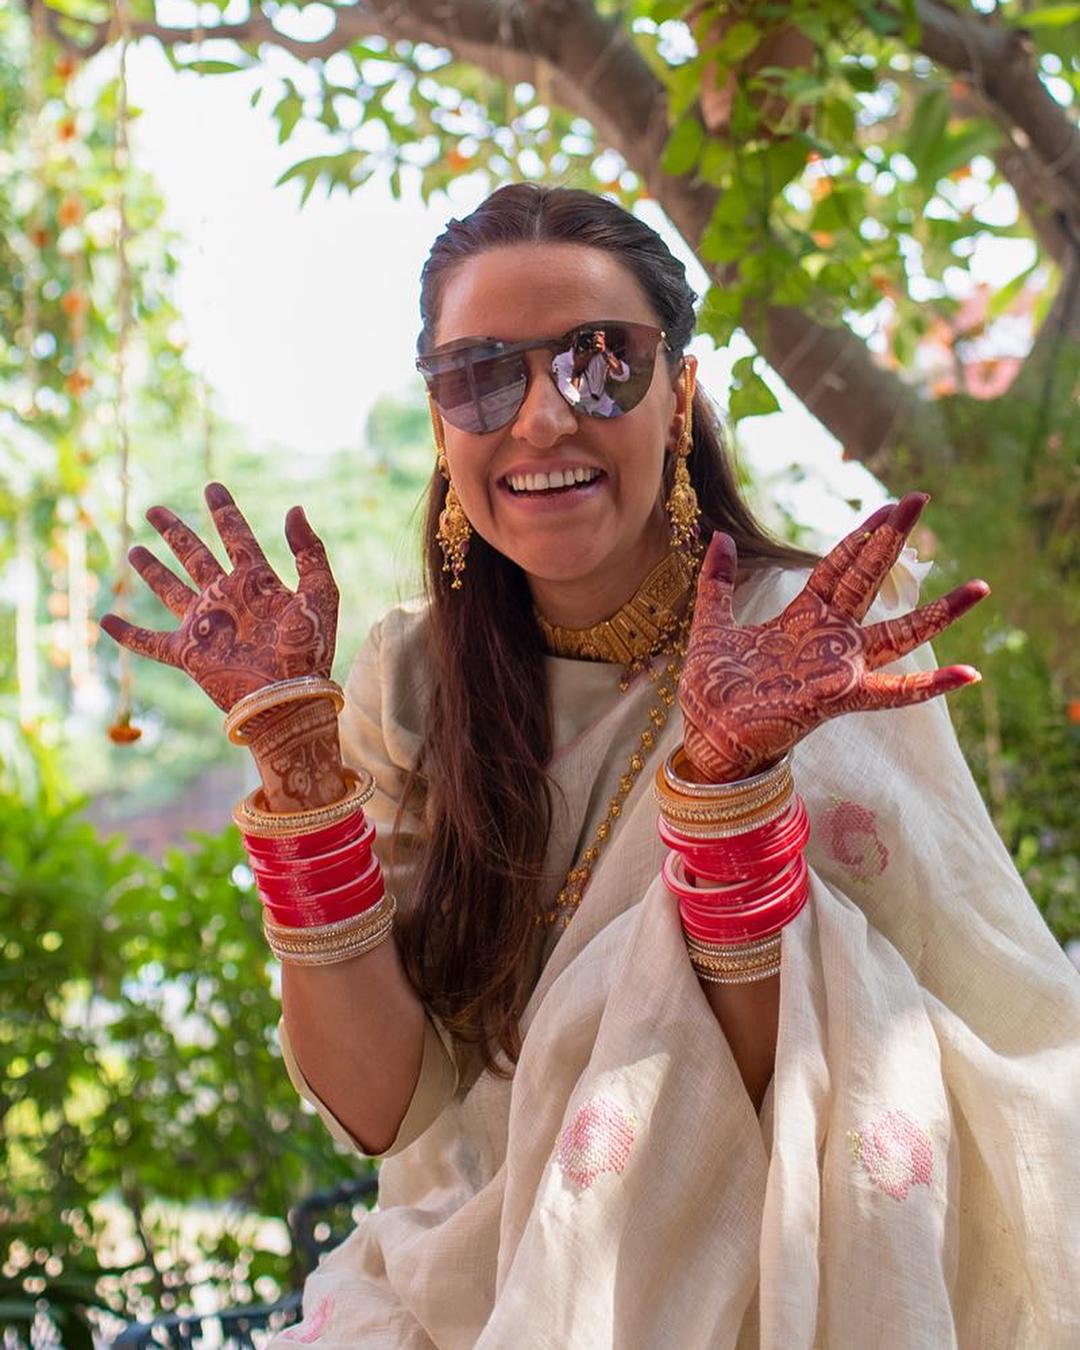 After the intimate mehandi festivities, the couple moved forward with a pre-wedding puja, a ceremonious occasion laden with cultural significance. For this event, Neha Dhupia made a striking choice by donning a delicate beige silk sari designed by Anavila.